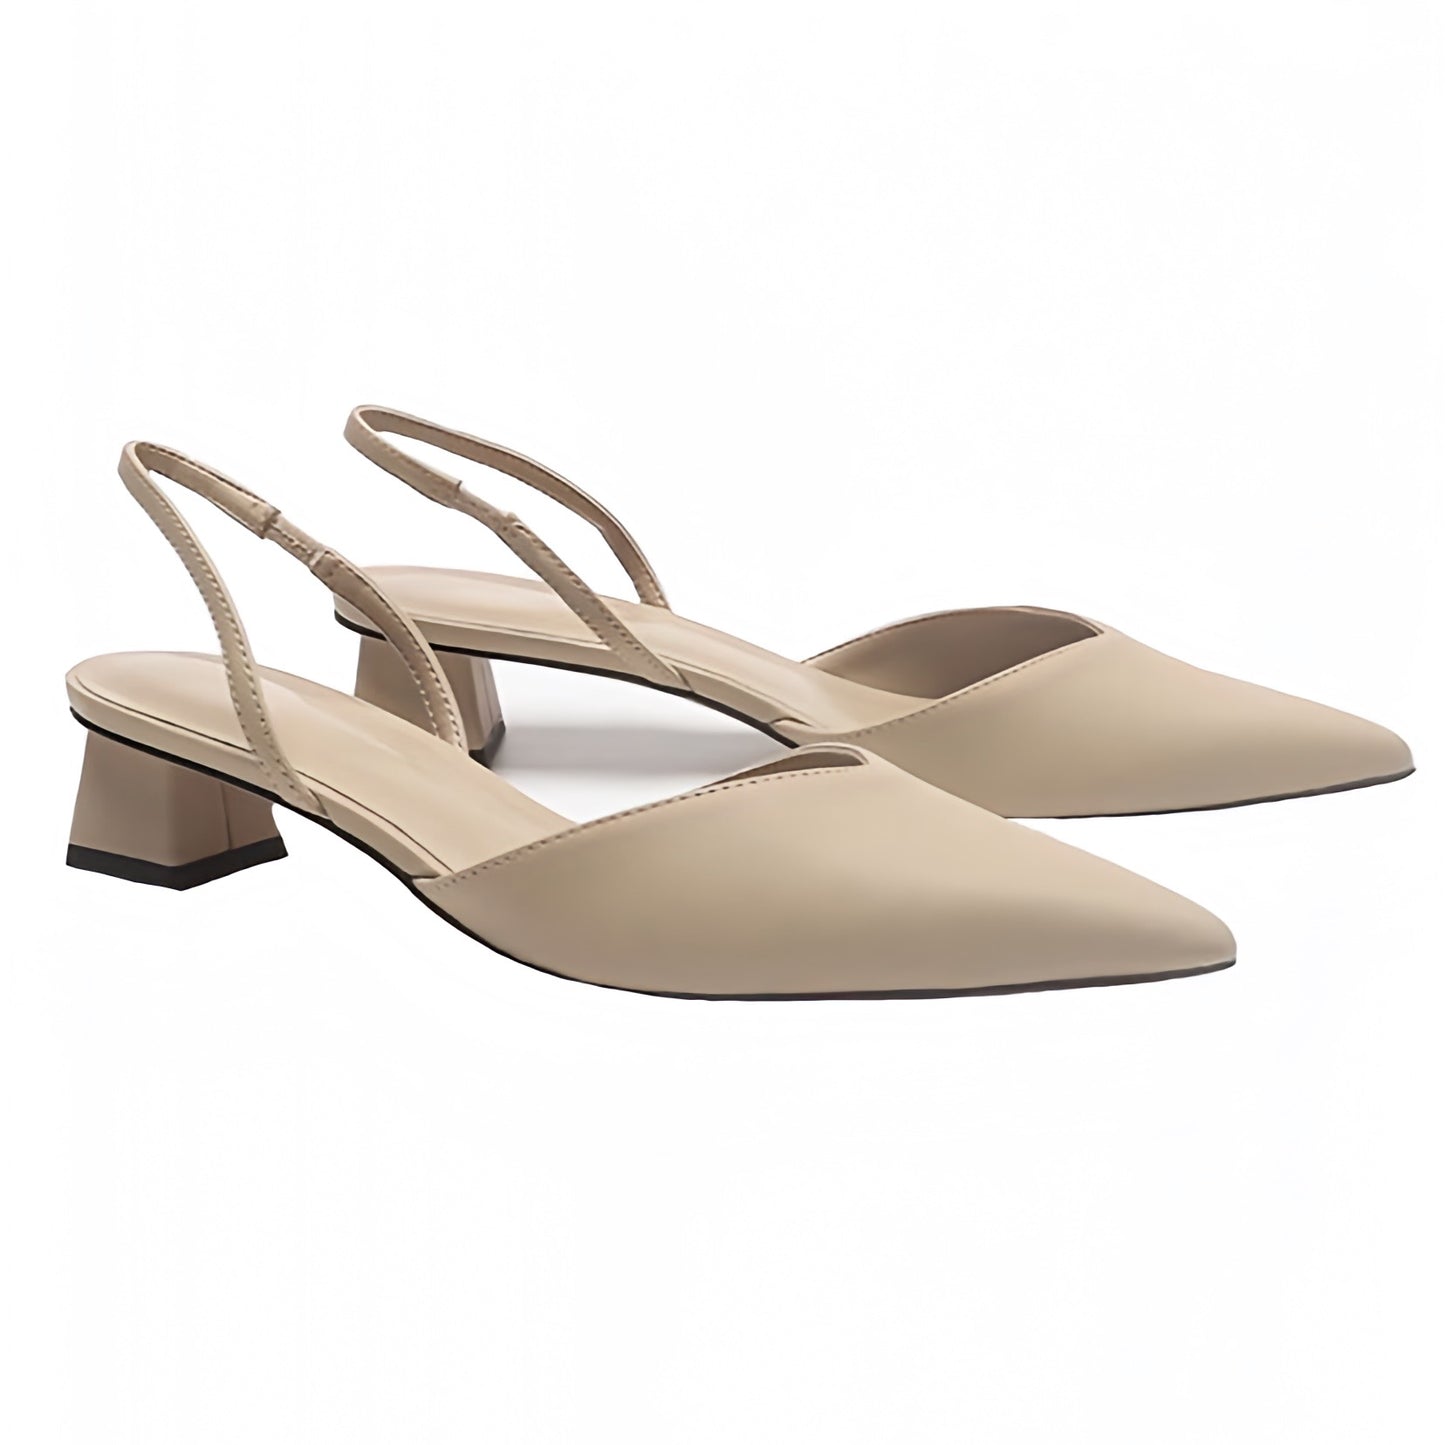 light-beige-nude-tan-neutral-slim-fit-slingback-strappy-low-medium-mid-block-heel-vegan-faux-suede-leather-pointy-toe-kitten-silhouette-sandals-high-heels-pumps-shoes-women-ladies-chic-trendy-spring-2024-summer-elegant-classy-classic-feminine-semi-formal-casual-vintage-gala-prom-hoco-homecoming-date-night-out-evening-cocktail-party-sexy-vacation-old-money-quiet-luxury-90s-minimalist-minimalism-office-siren-stockholm-style-revolve-dolce-vita-dupe